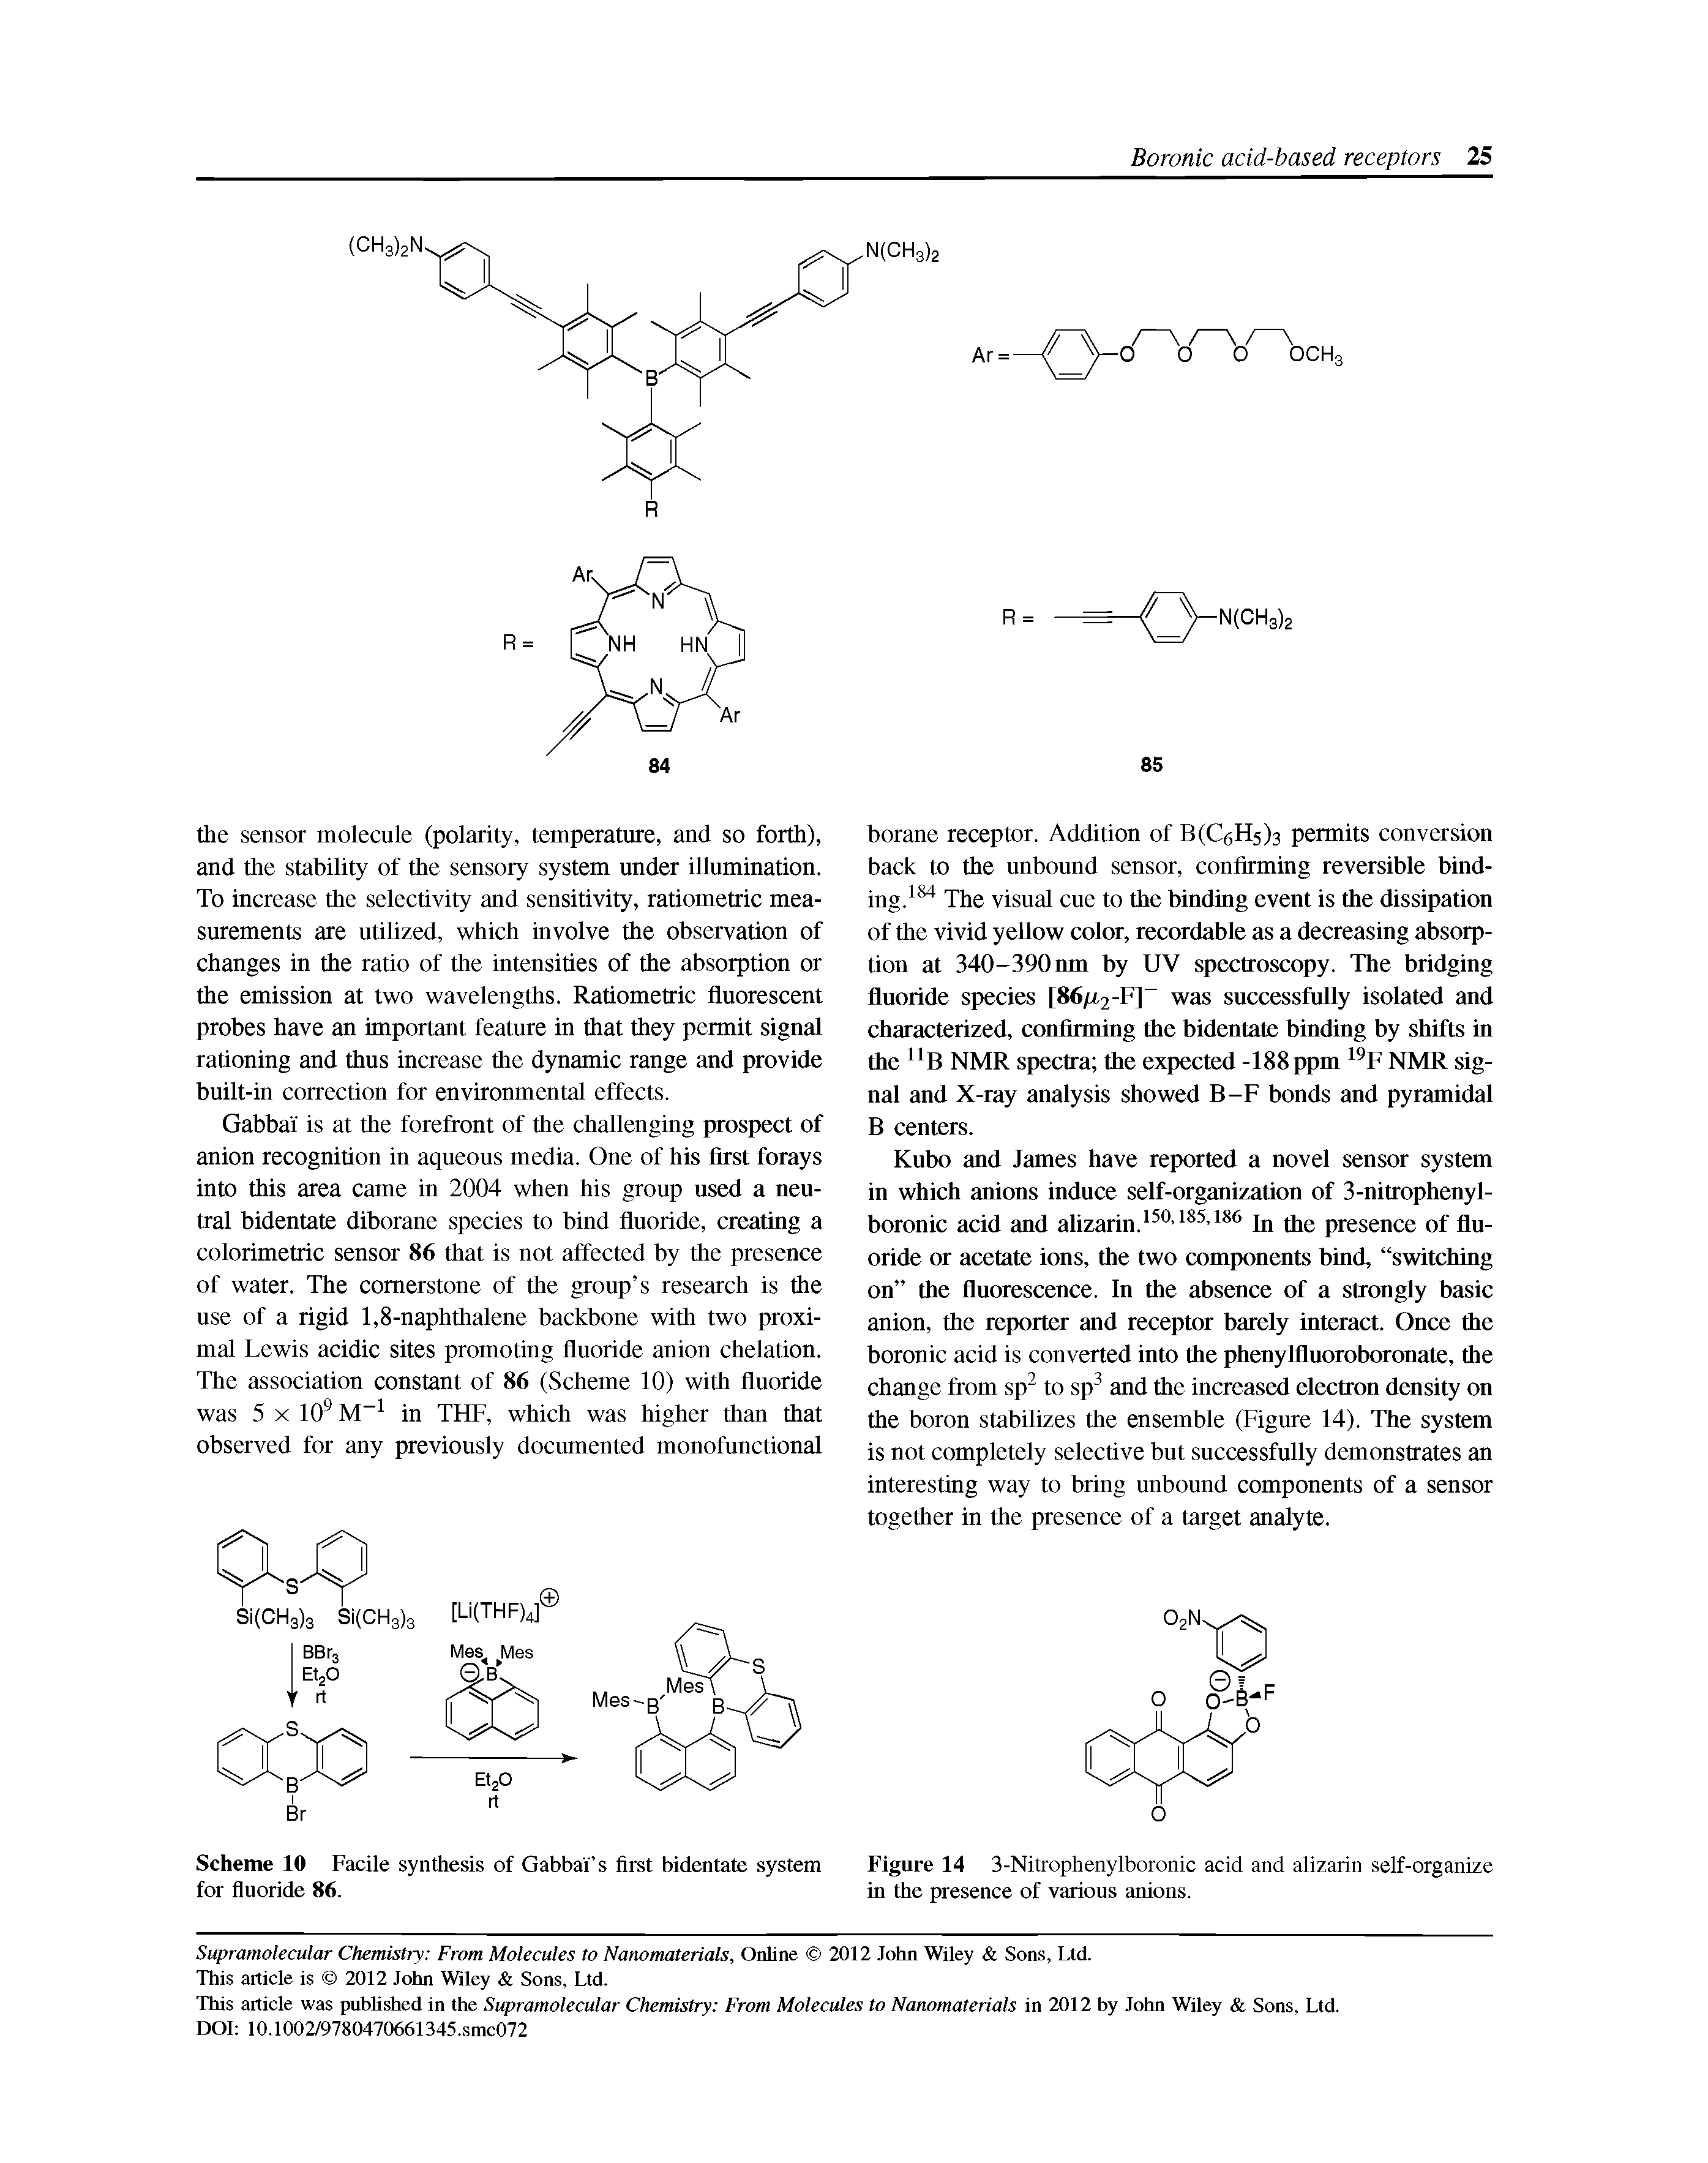 Figure 14 3-Nitrophenylboronic acid and alizarin self-organize in the presence of various anions.